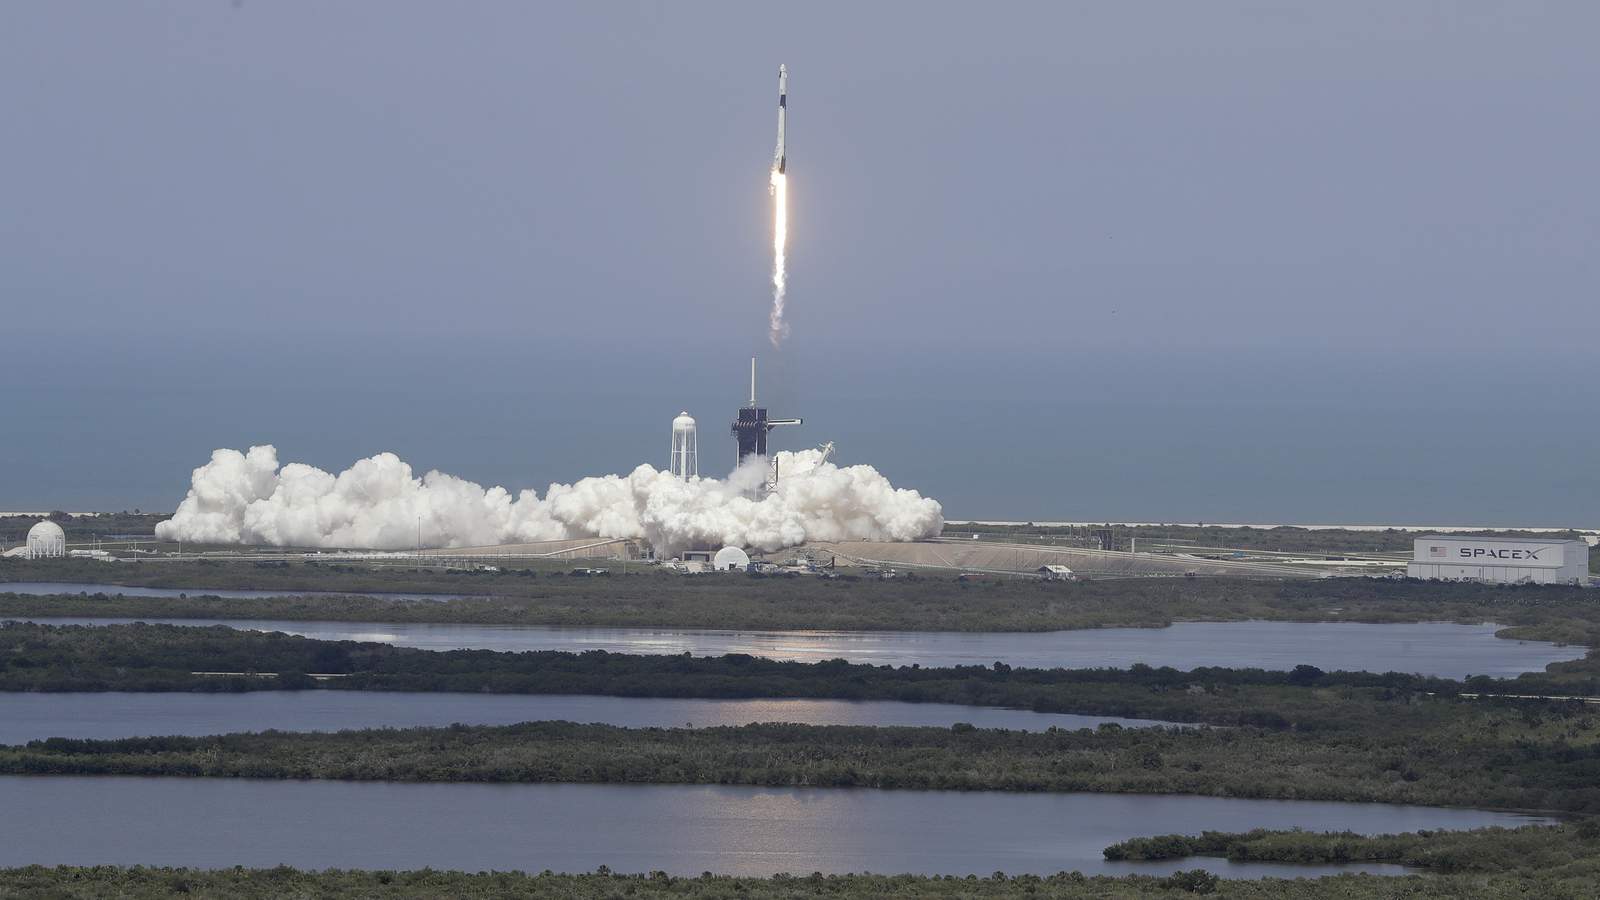 These 14 weather conditions would prevent SpaceX from launching the Falcon 9, Crew Dragon